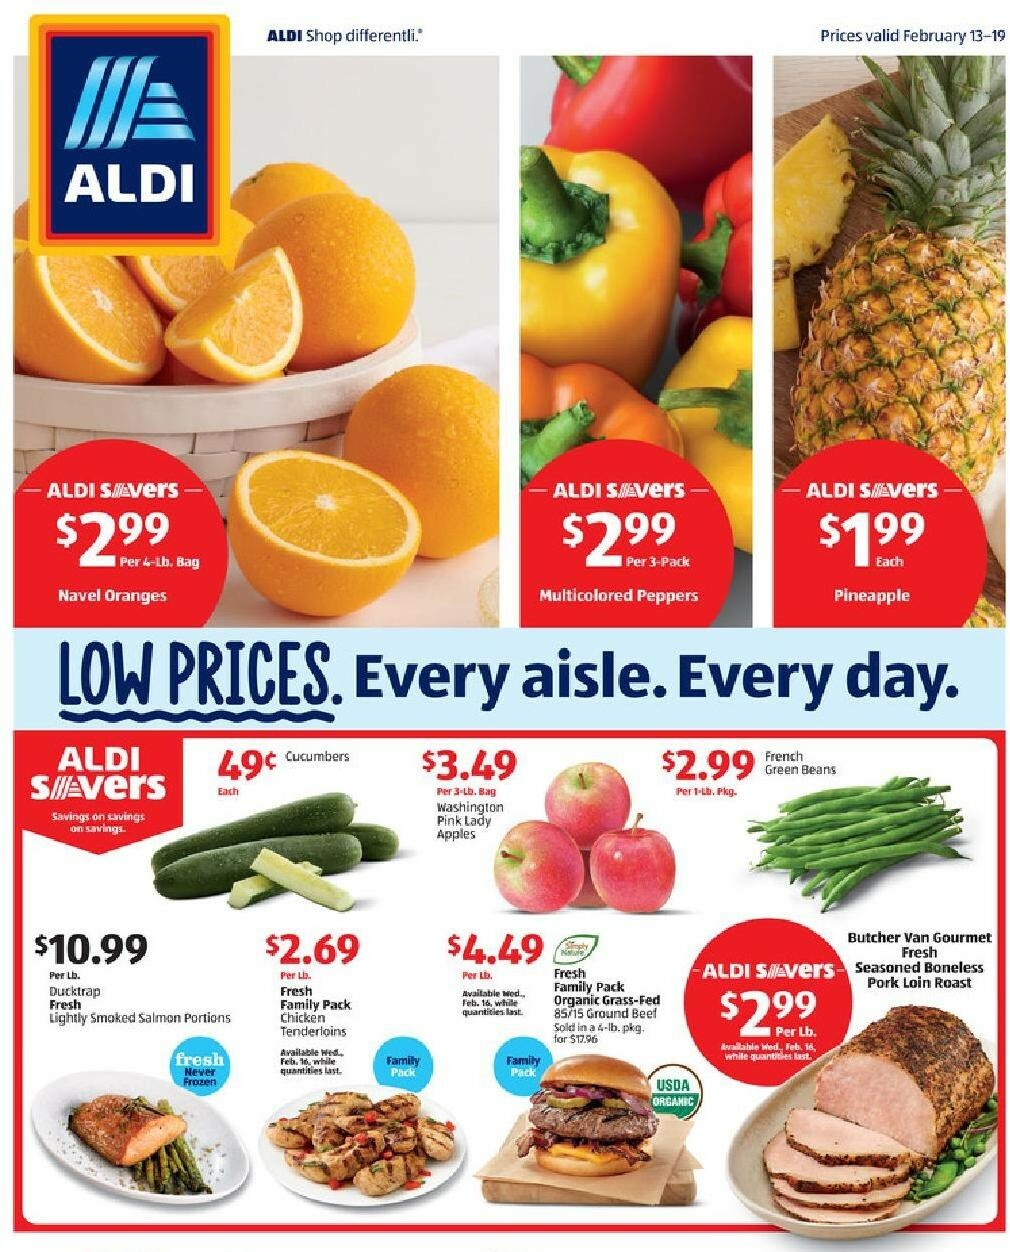 ALDI US Weekly Ads & Special Buys from February 13